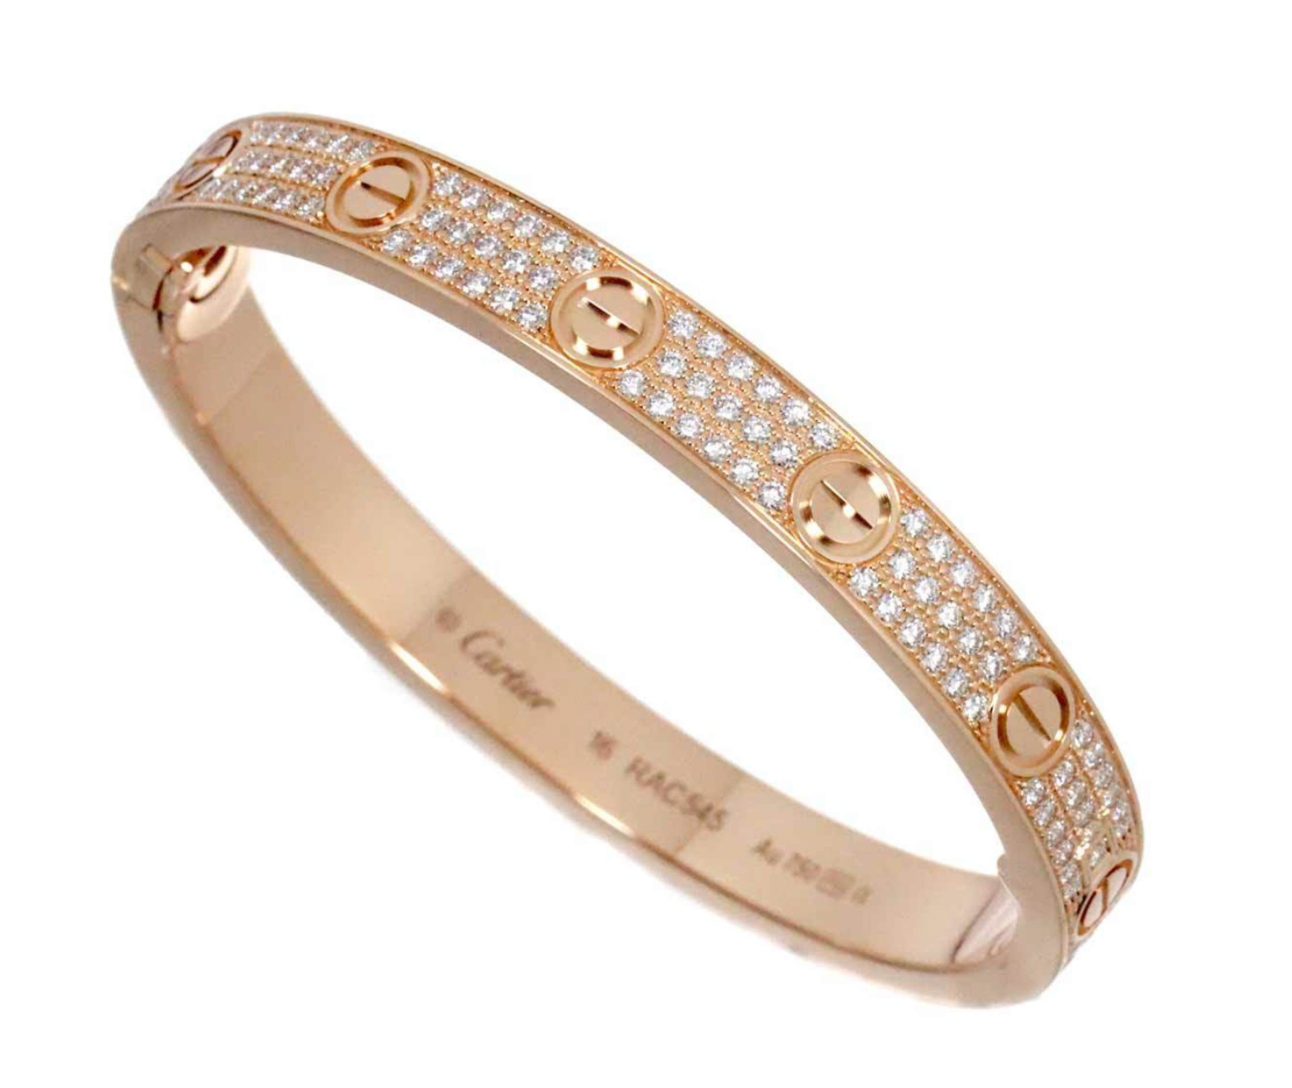 Pre-owned 18k rose gold Cartier LOVE Bracelet adorned with 204 diamonds of 1.99ctw